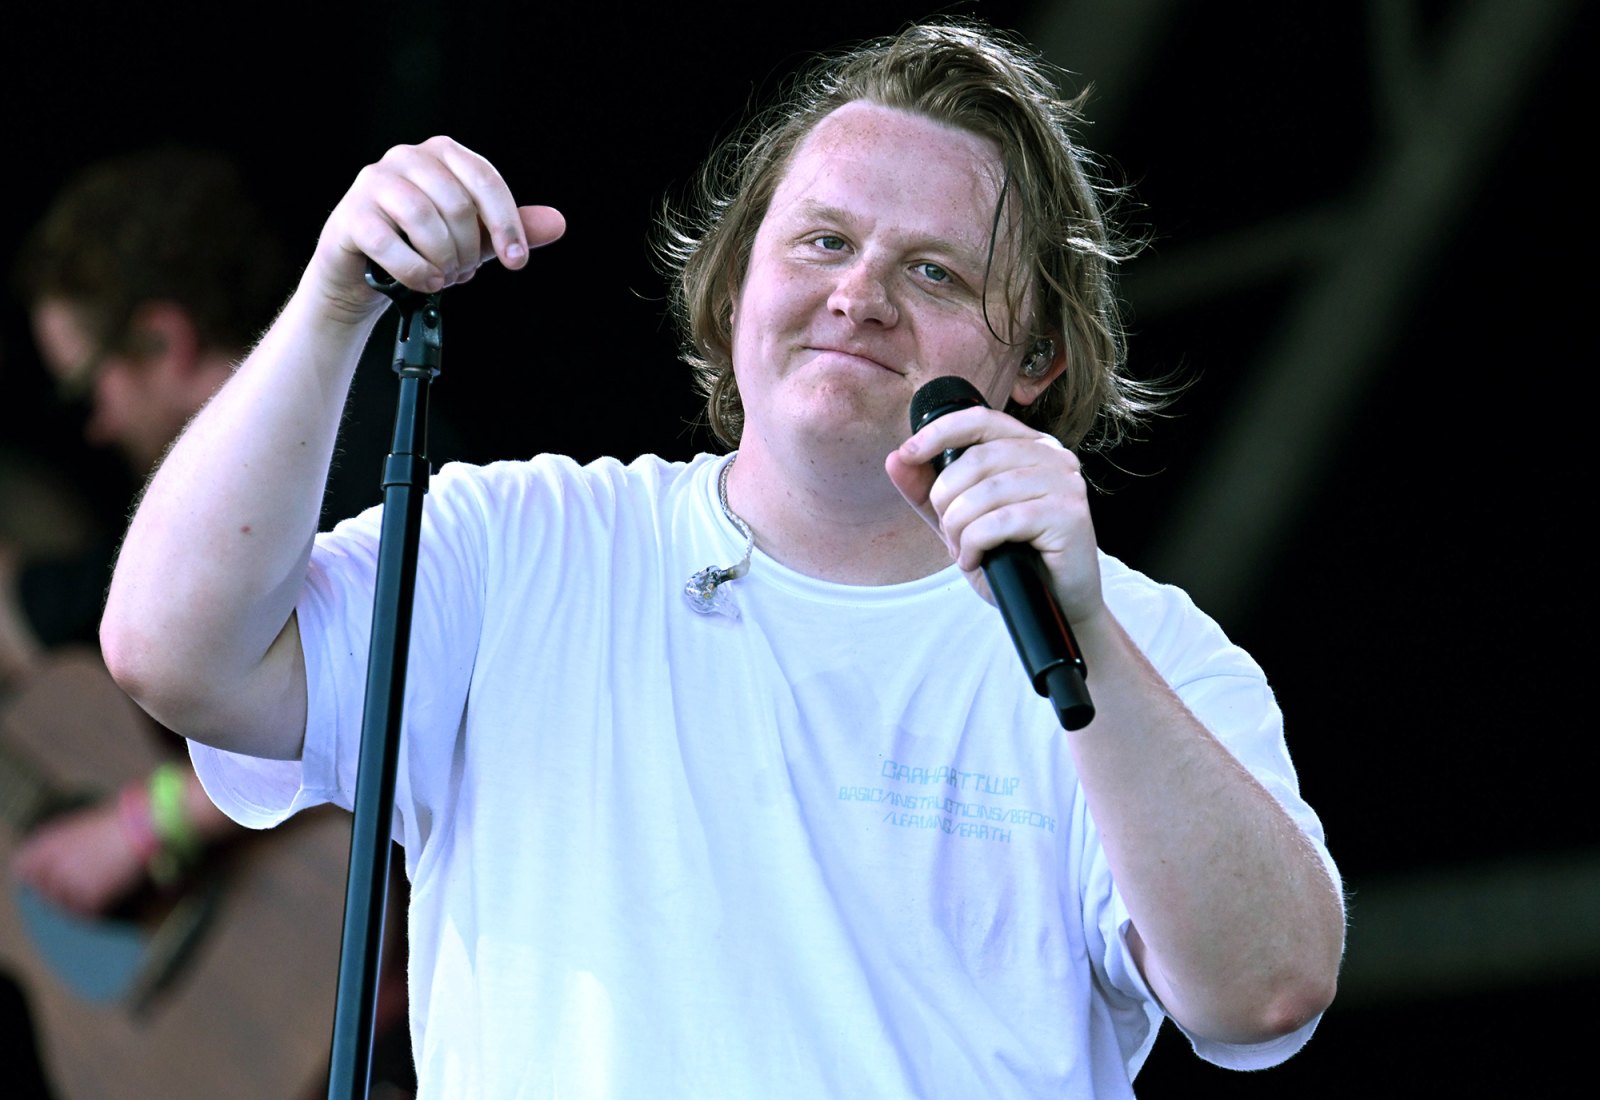 Lewis Capaldi Apologizes to Glastonbury Crowd After Losing Voice Us